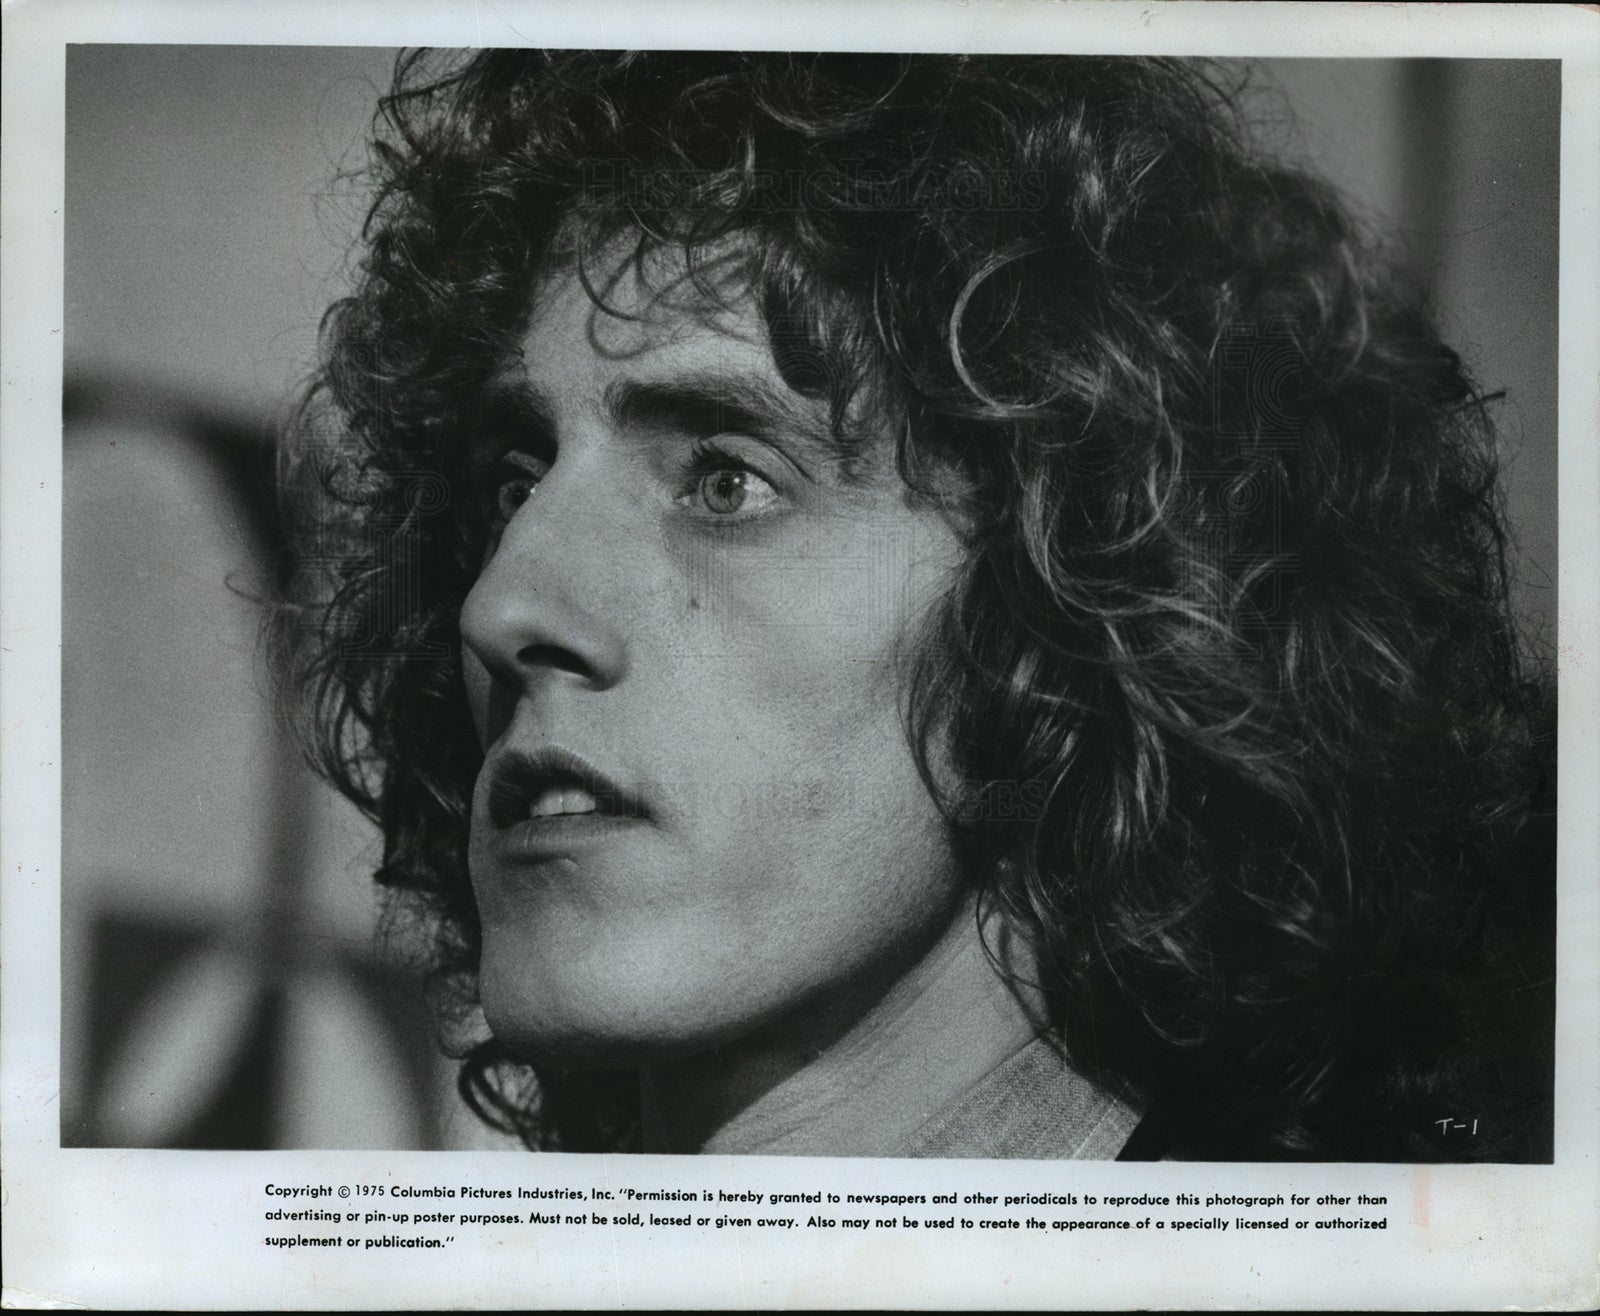 1975 Press Photo Roger Daltrey is having problems wit his hearing - mjx00497- Historic Images